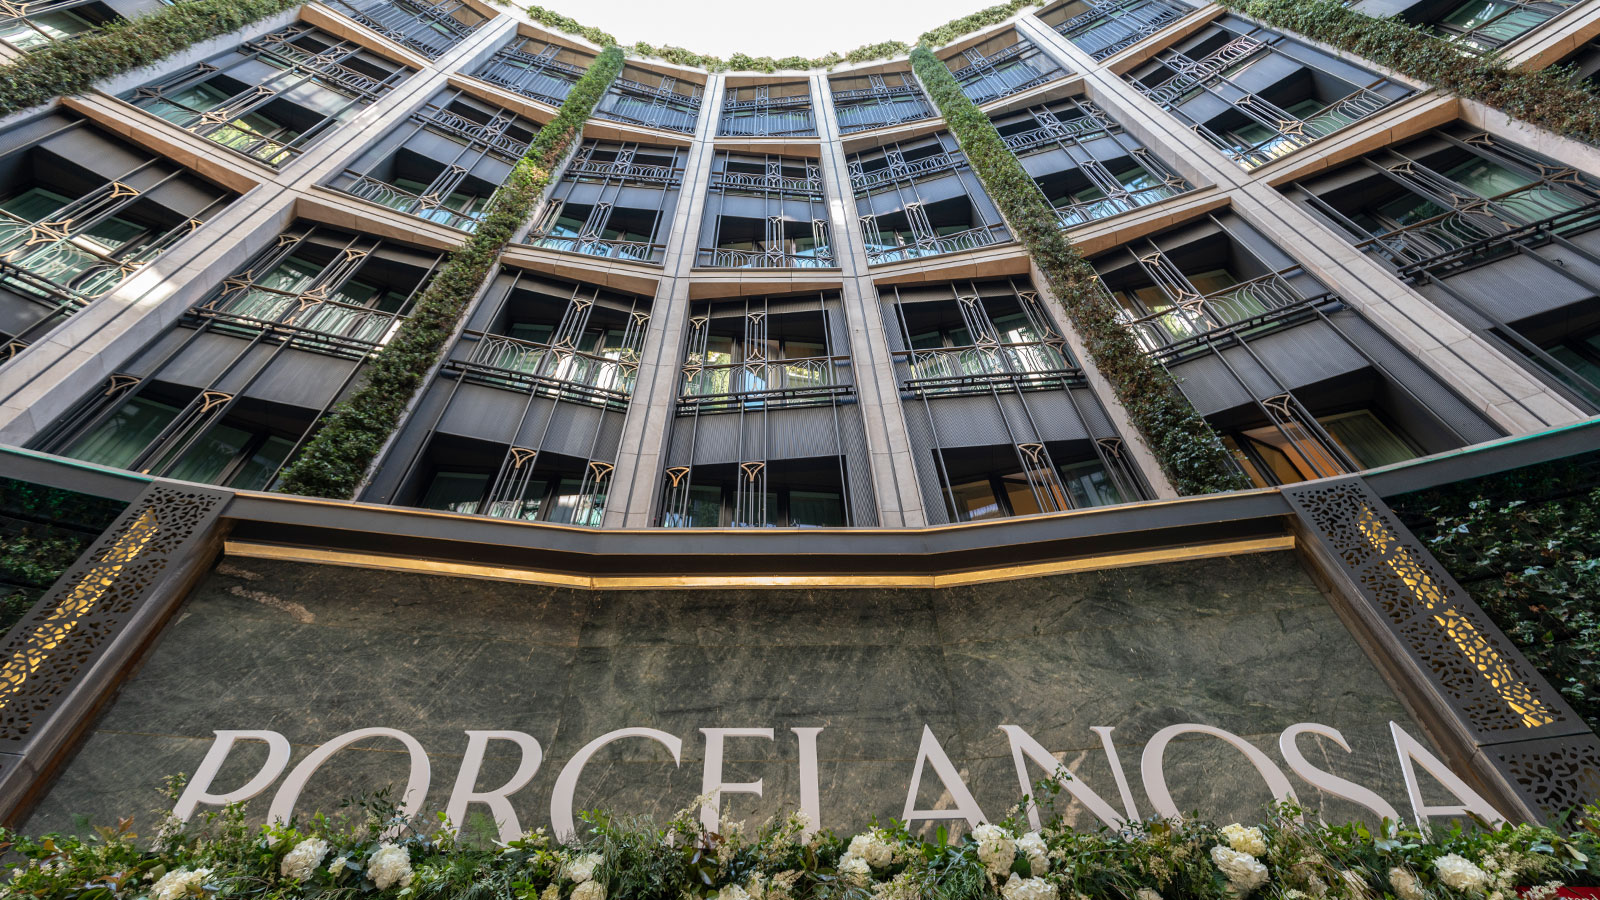 Sustainability and property management mark the 13th edition of the Porcelanosa Awards